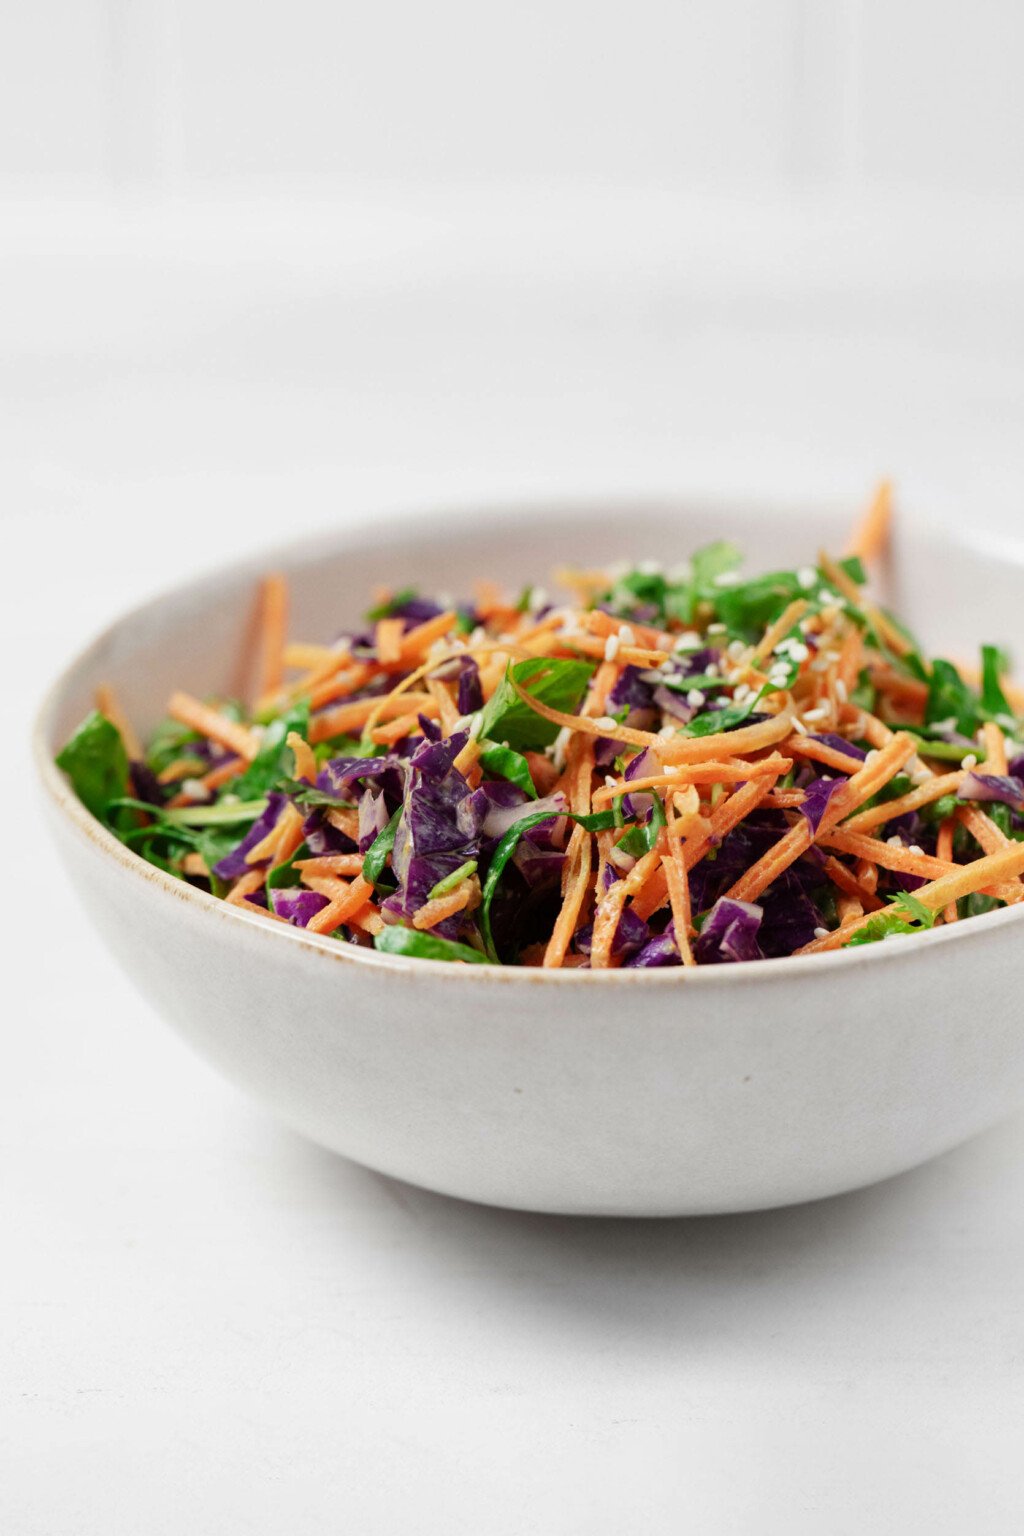 An overhead image of a bowl of colorful vegetable slaw, prepared with a creamy turmeric dressing and garnished with sesame seeds.